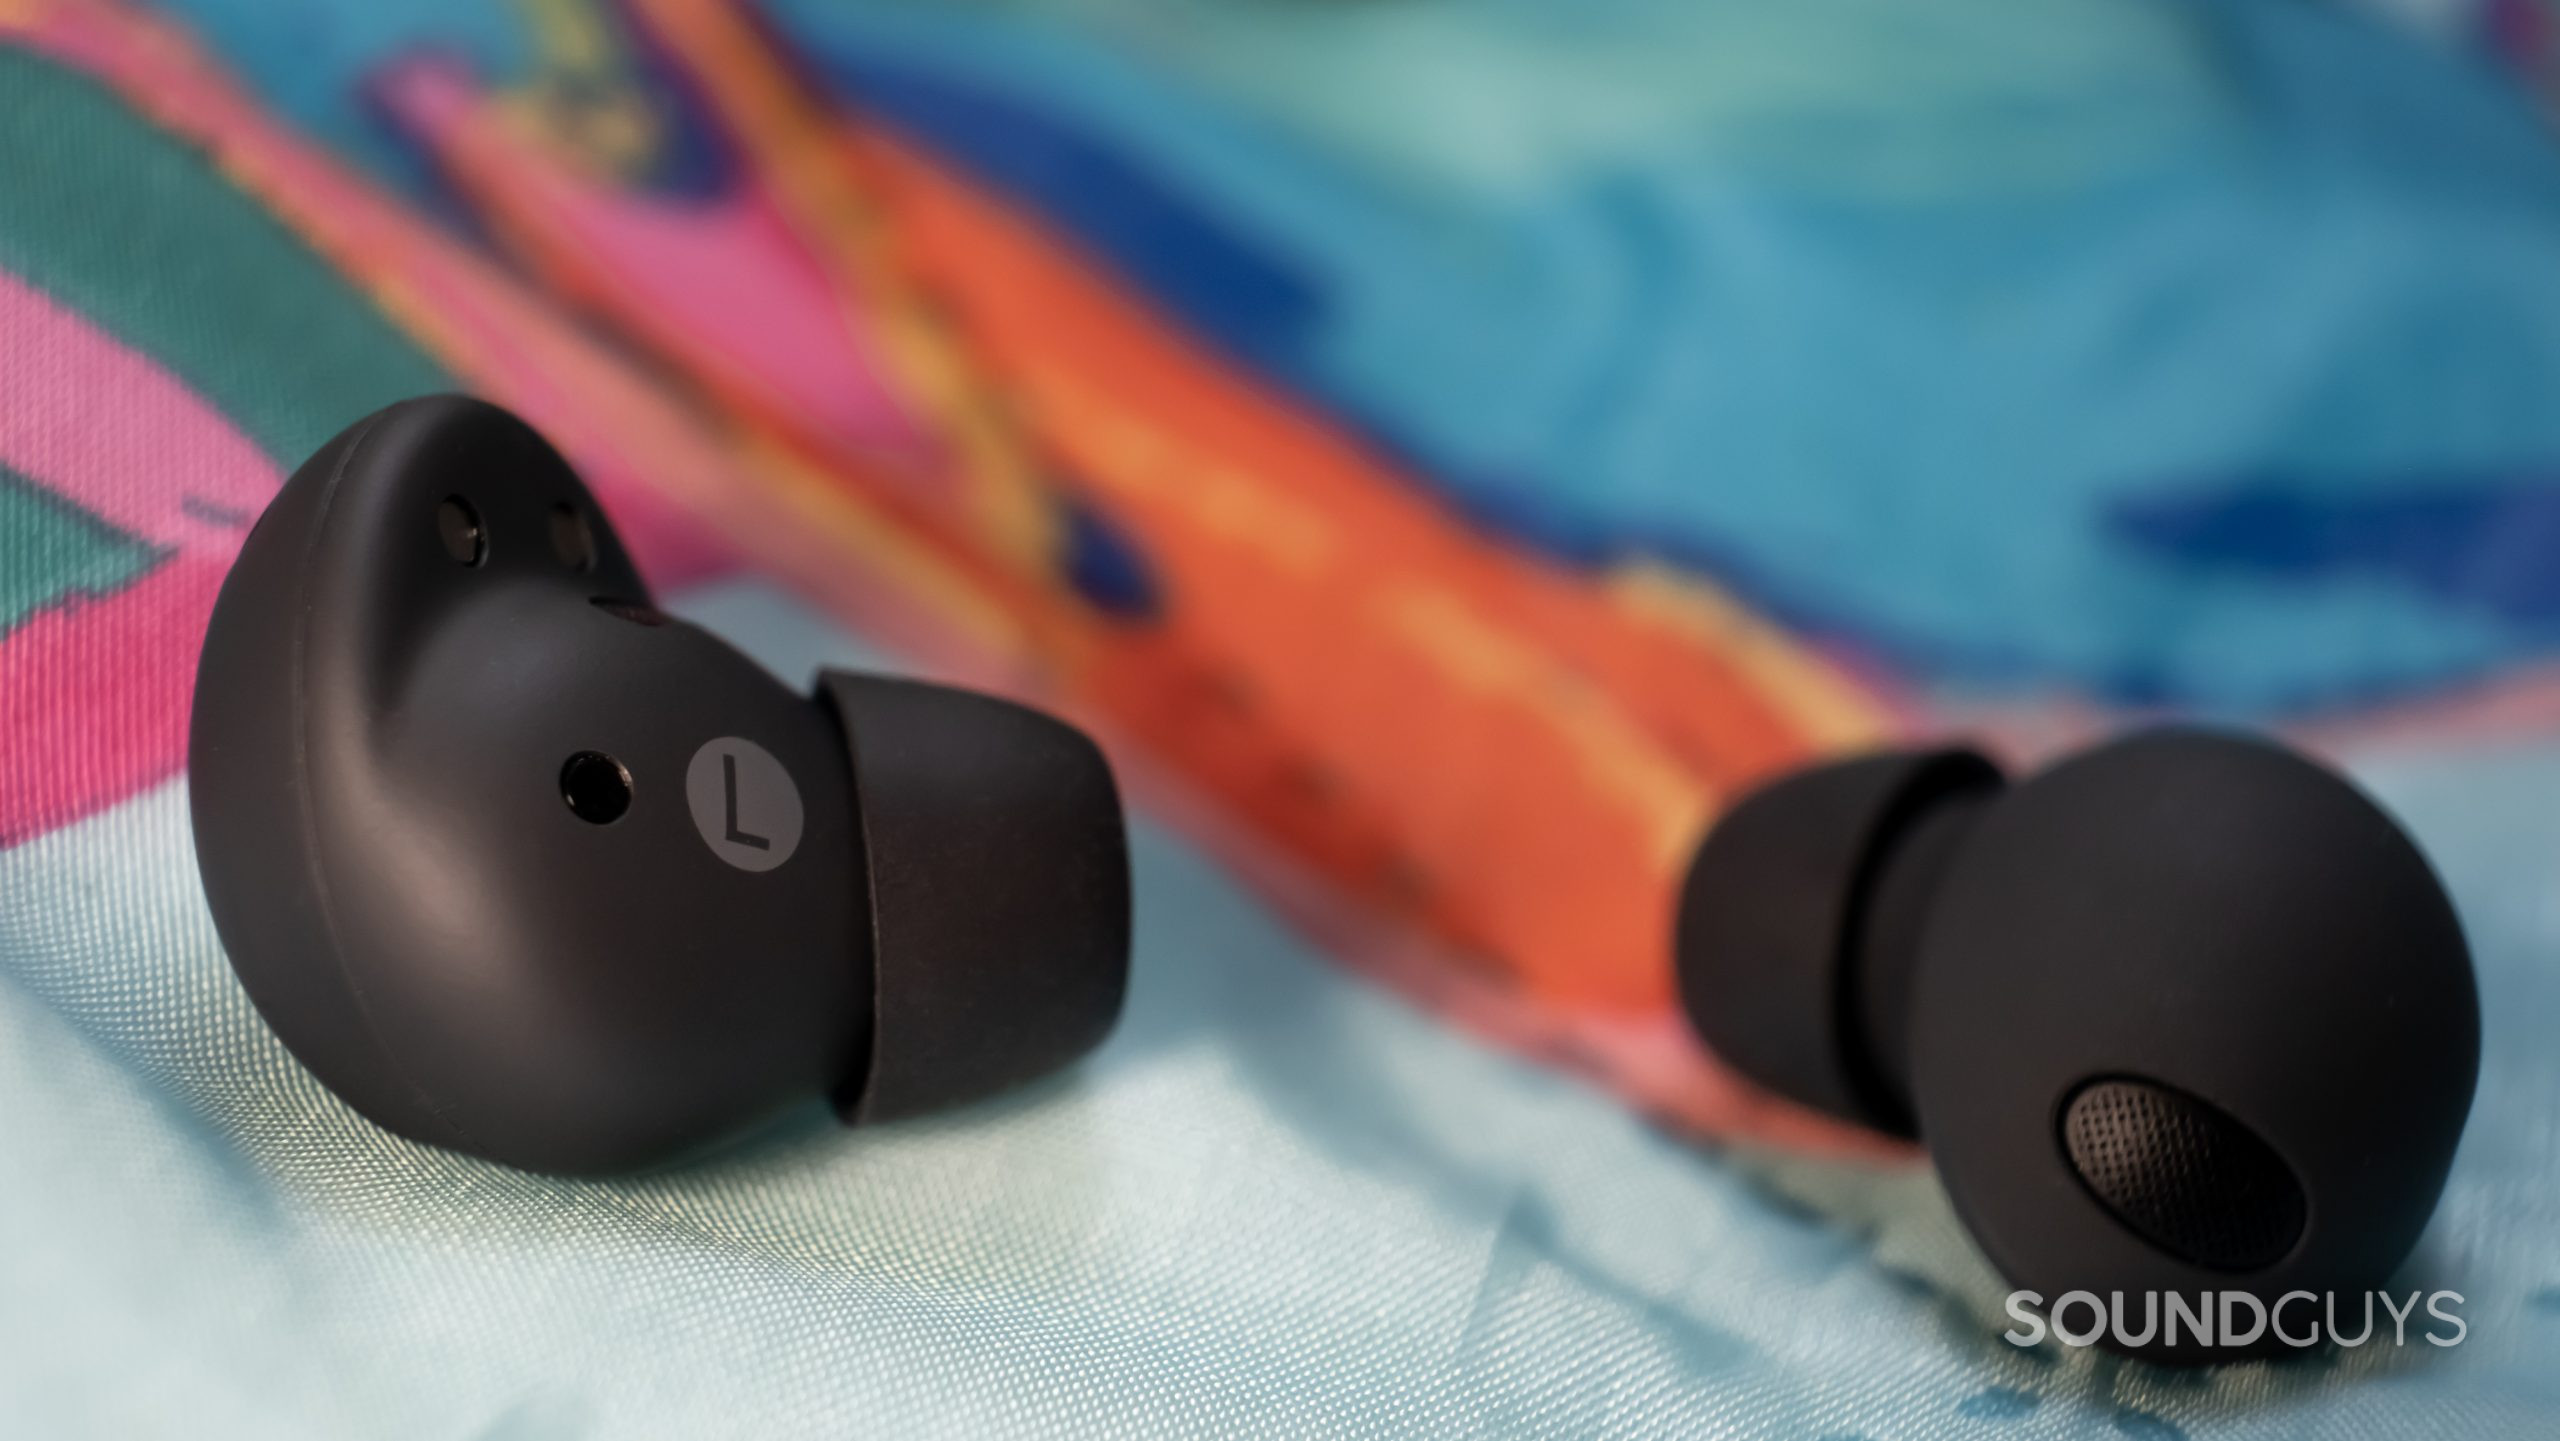 A macro close up of the Samsung Galaxy Buds 2 Pro shows the inner and outer housing, including the ear tips and vent, while resting on a colorful blanket.